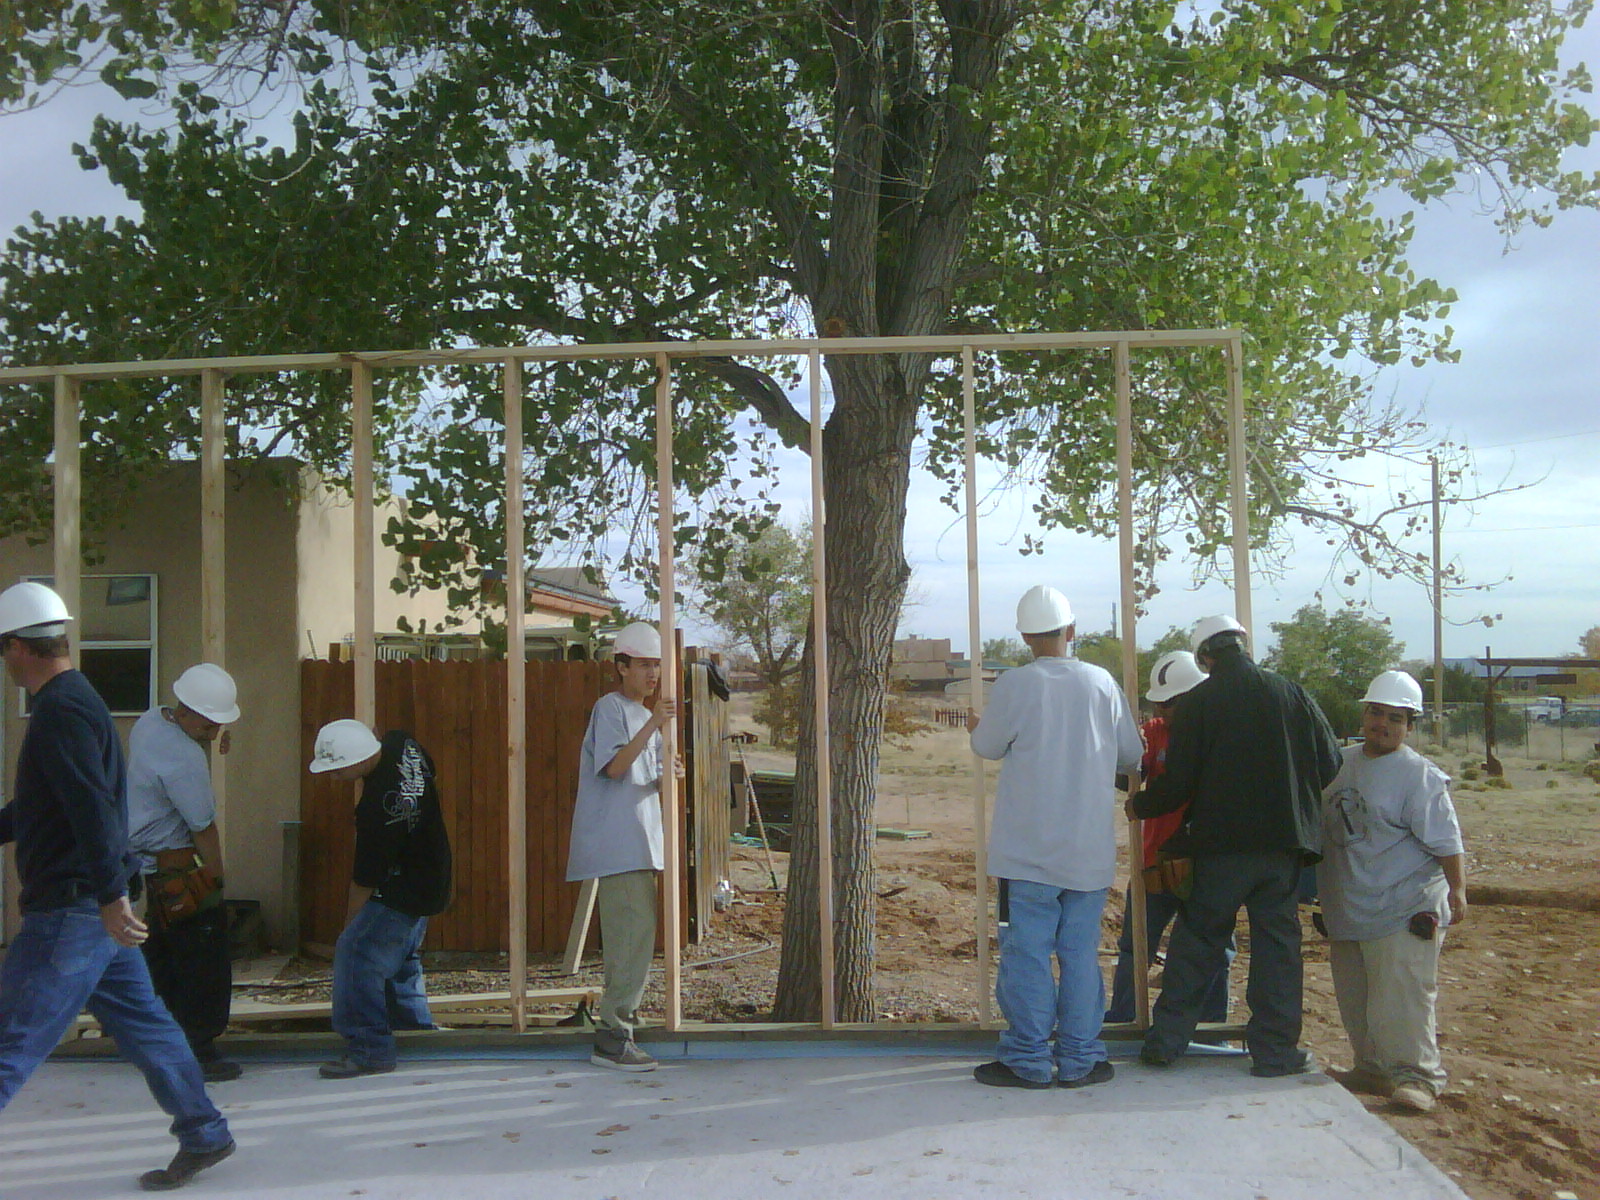 YouthBuild crew works on framing house they're building with Habitat for Humanity.